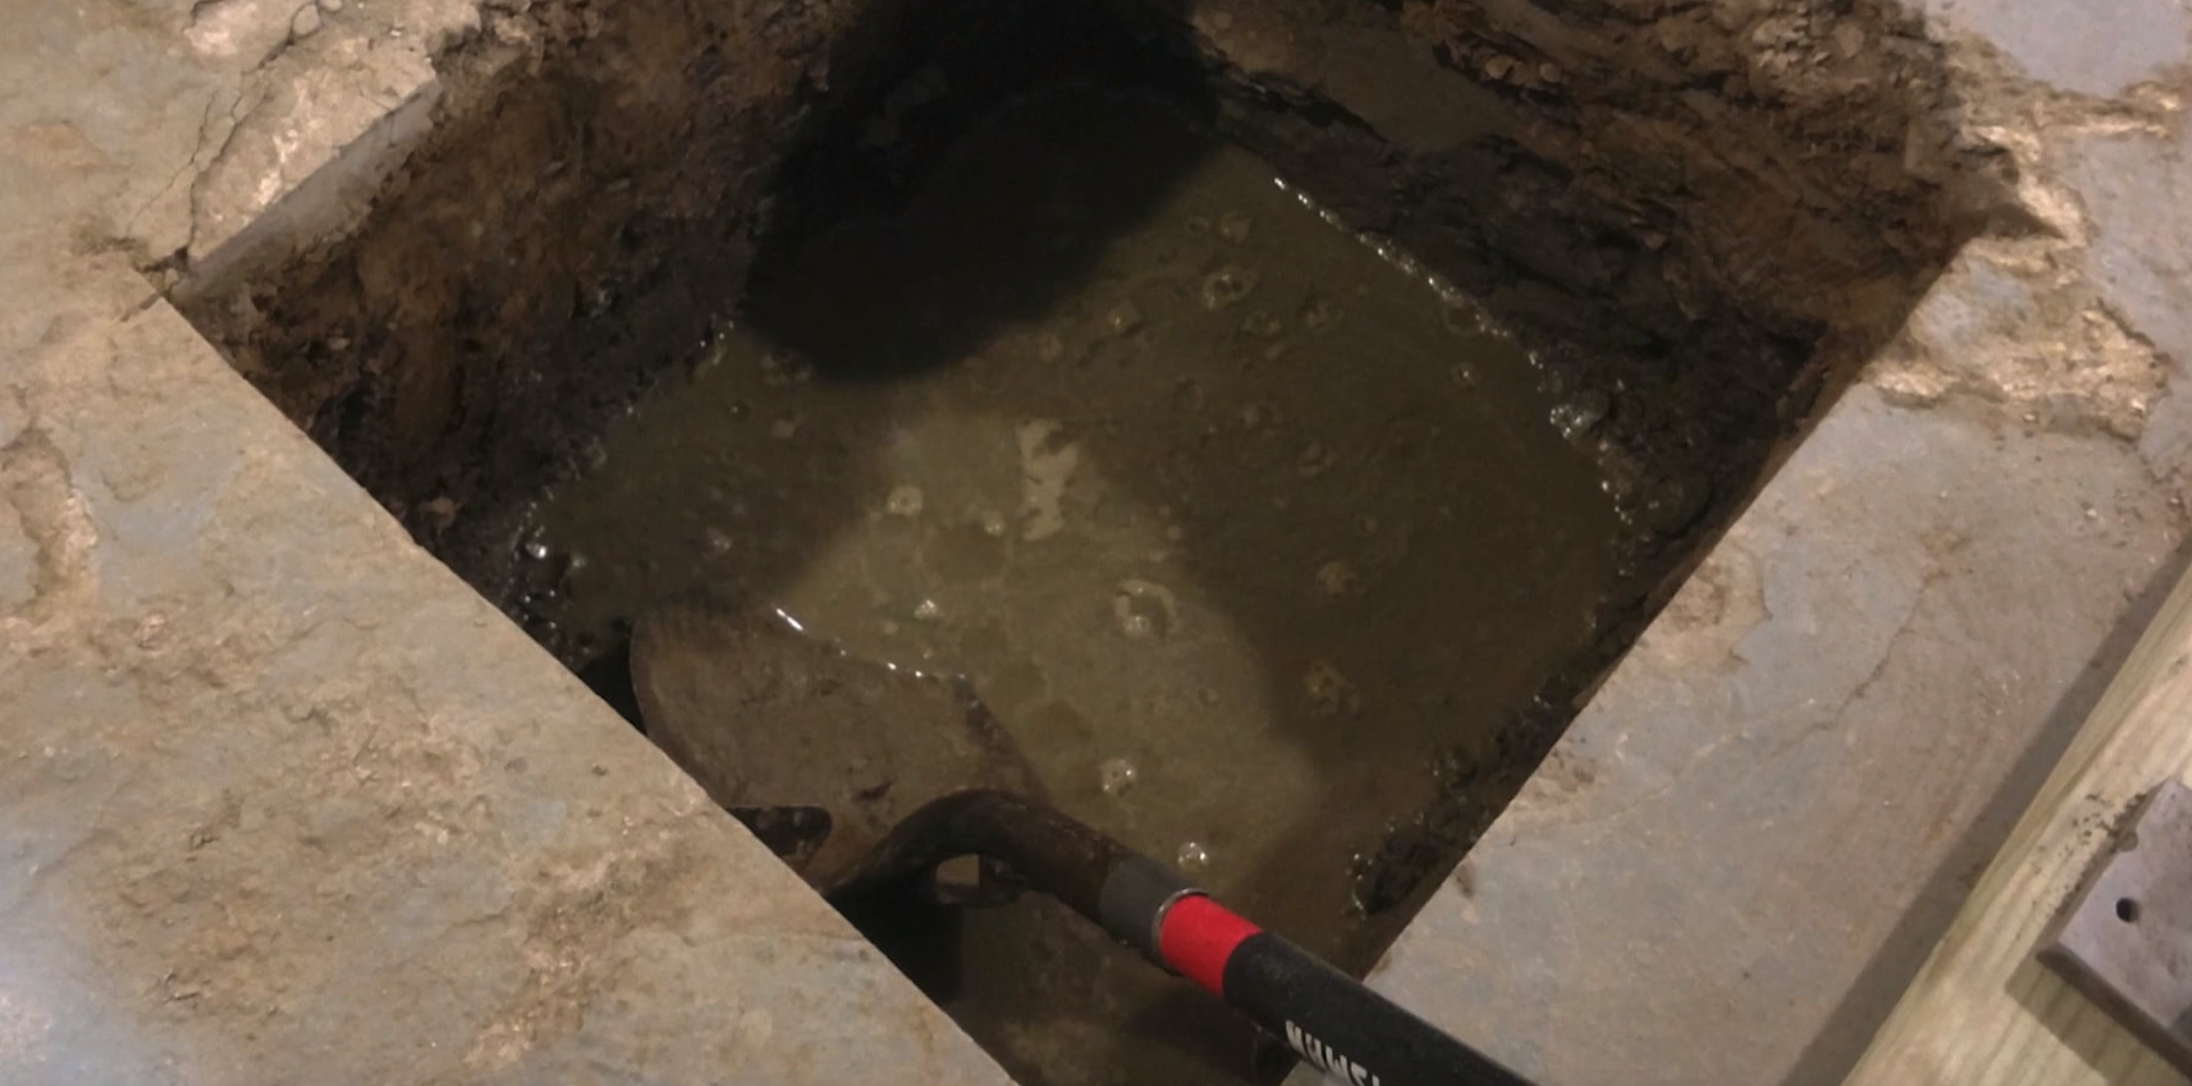 Undersized center foundation footer causes home to sink | Lakewood, OH